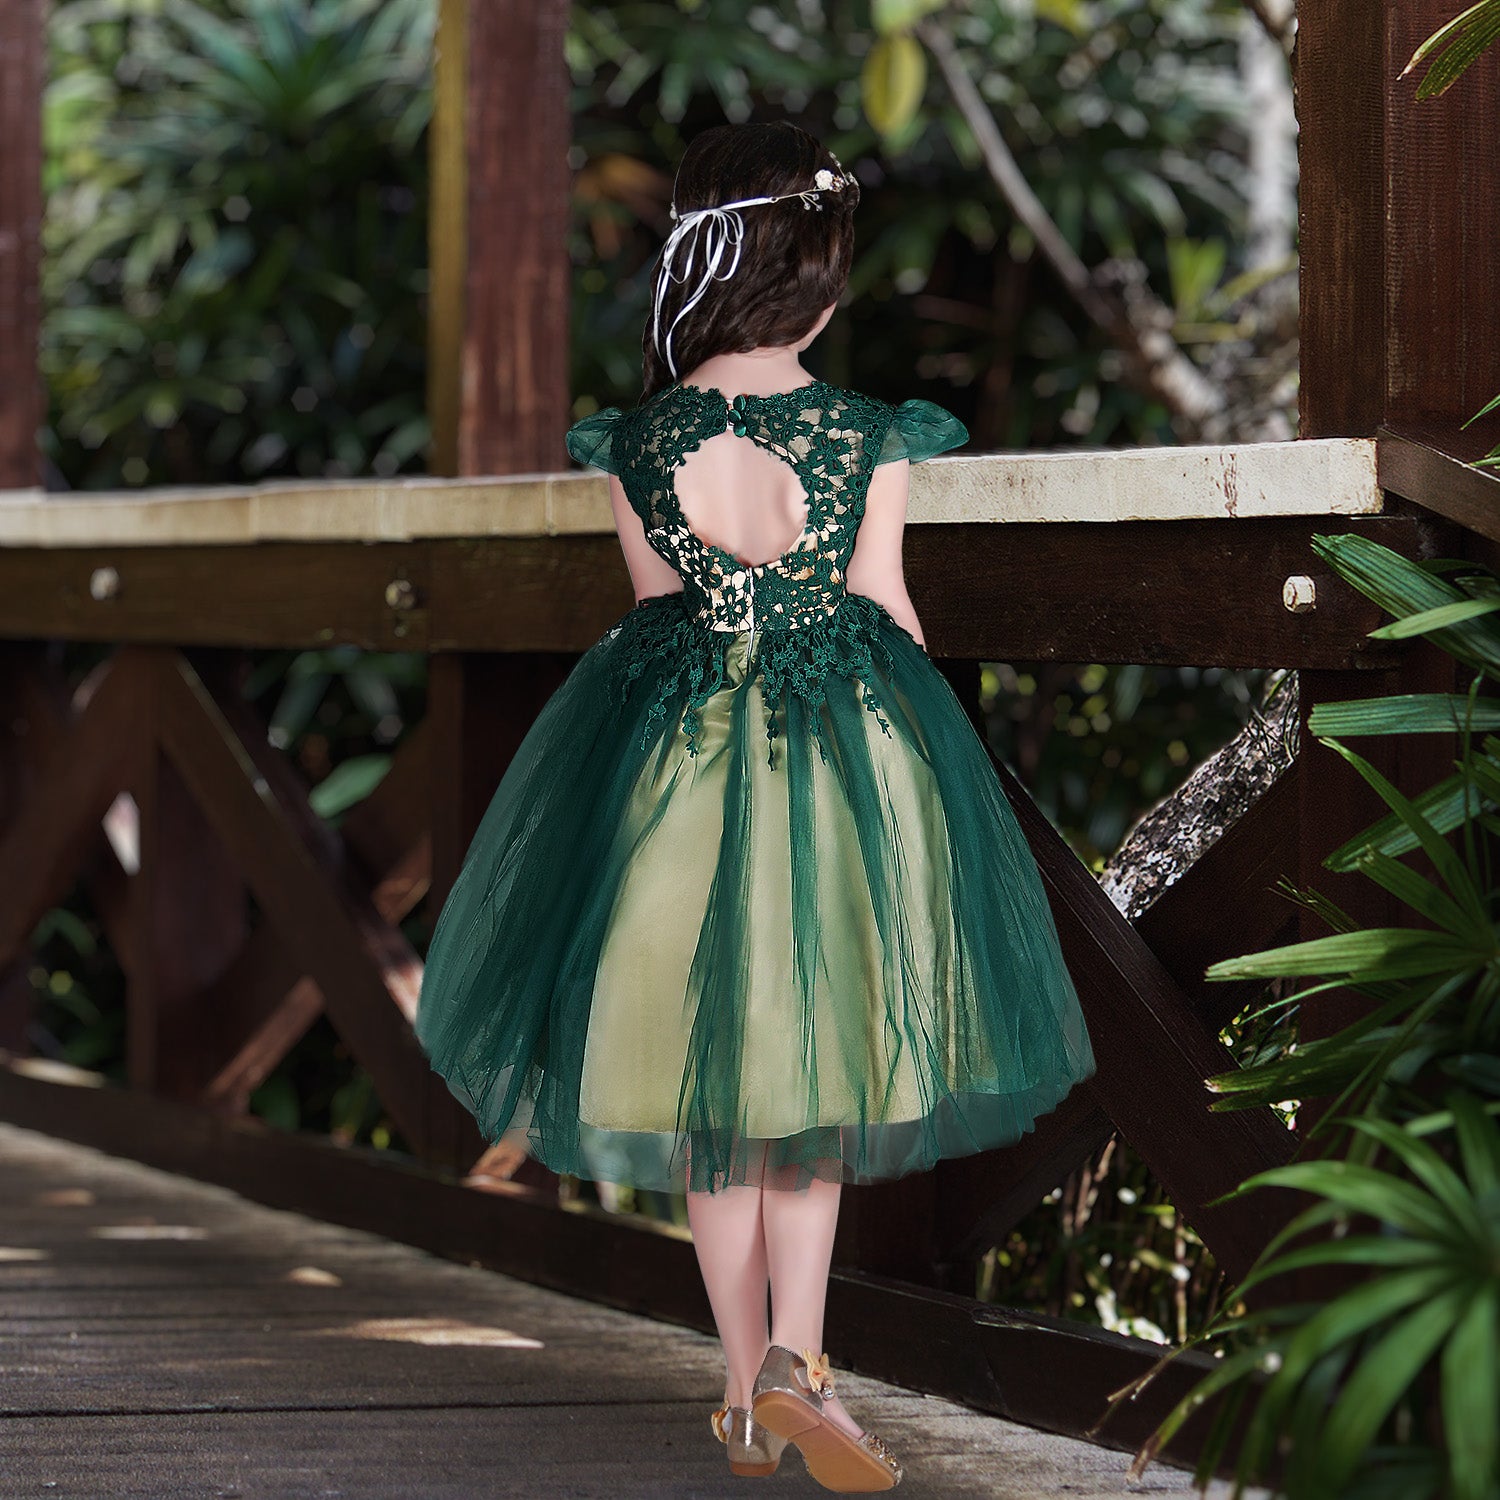 Robyn Dress Floral Green - Wedding Dresses, Evening Wear and Party Clothes  by Alie Street.